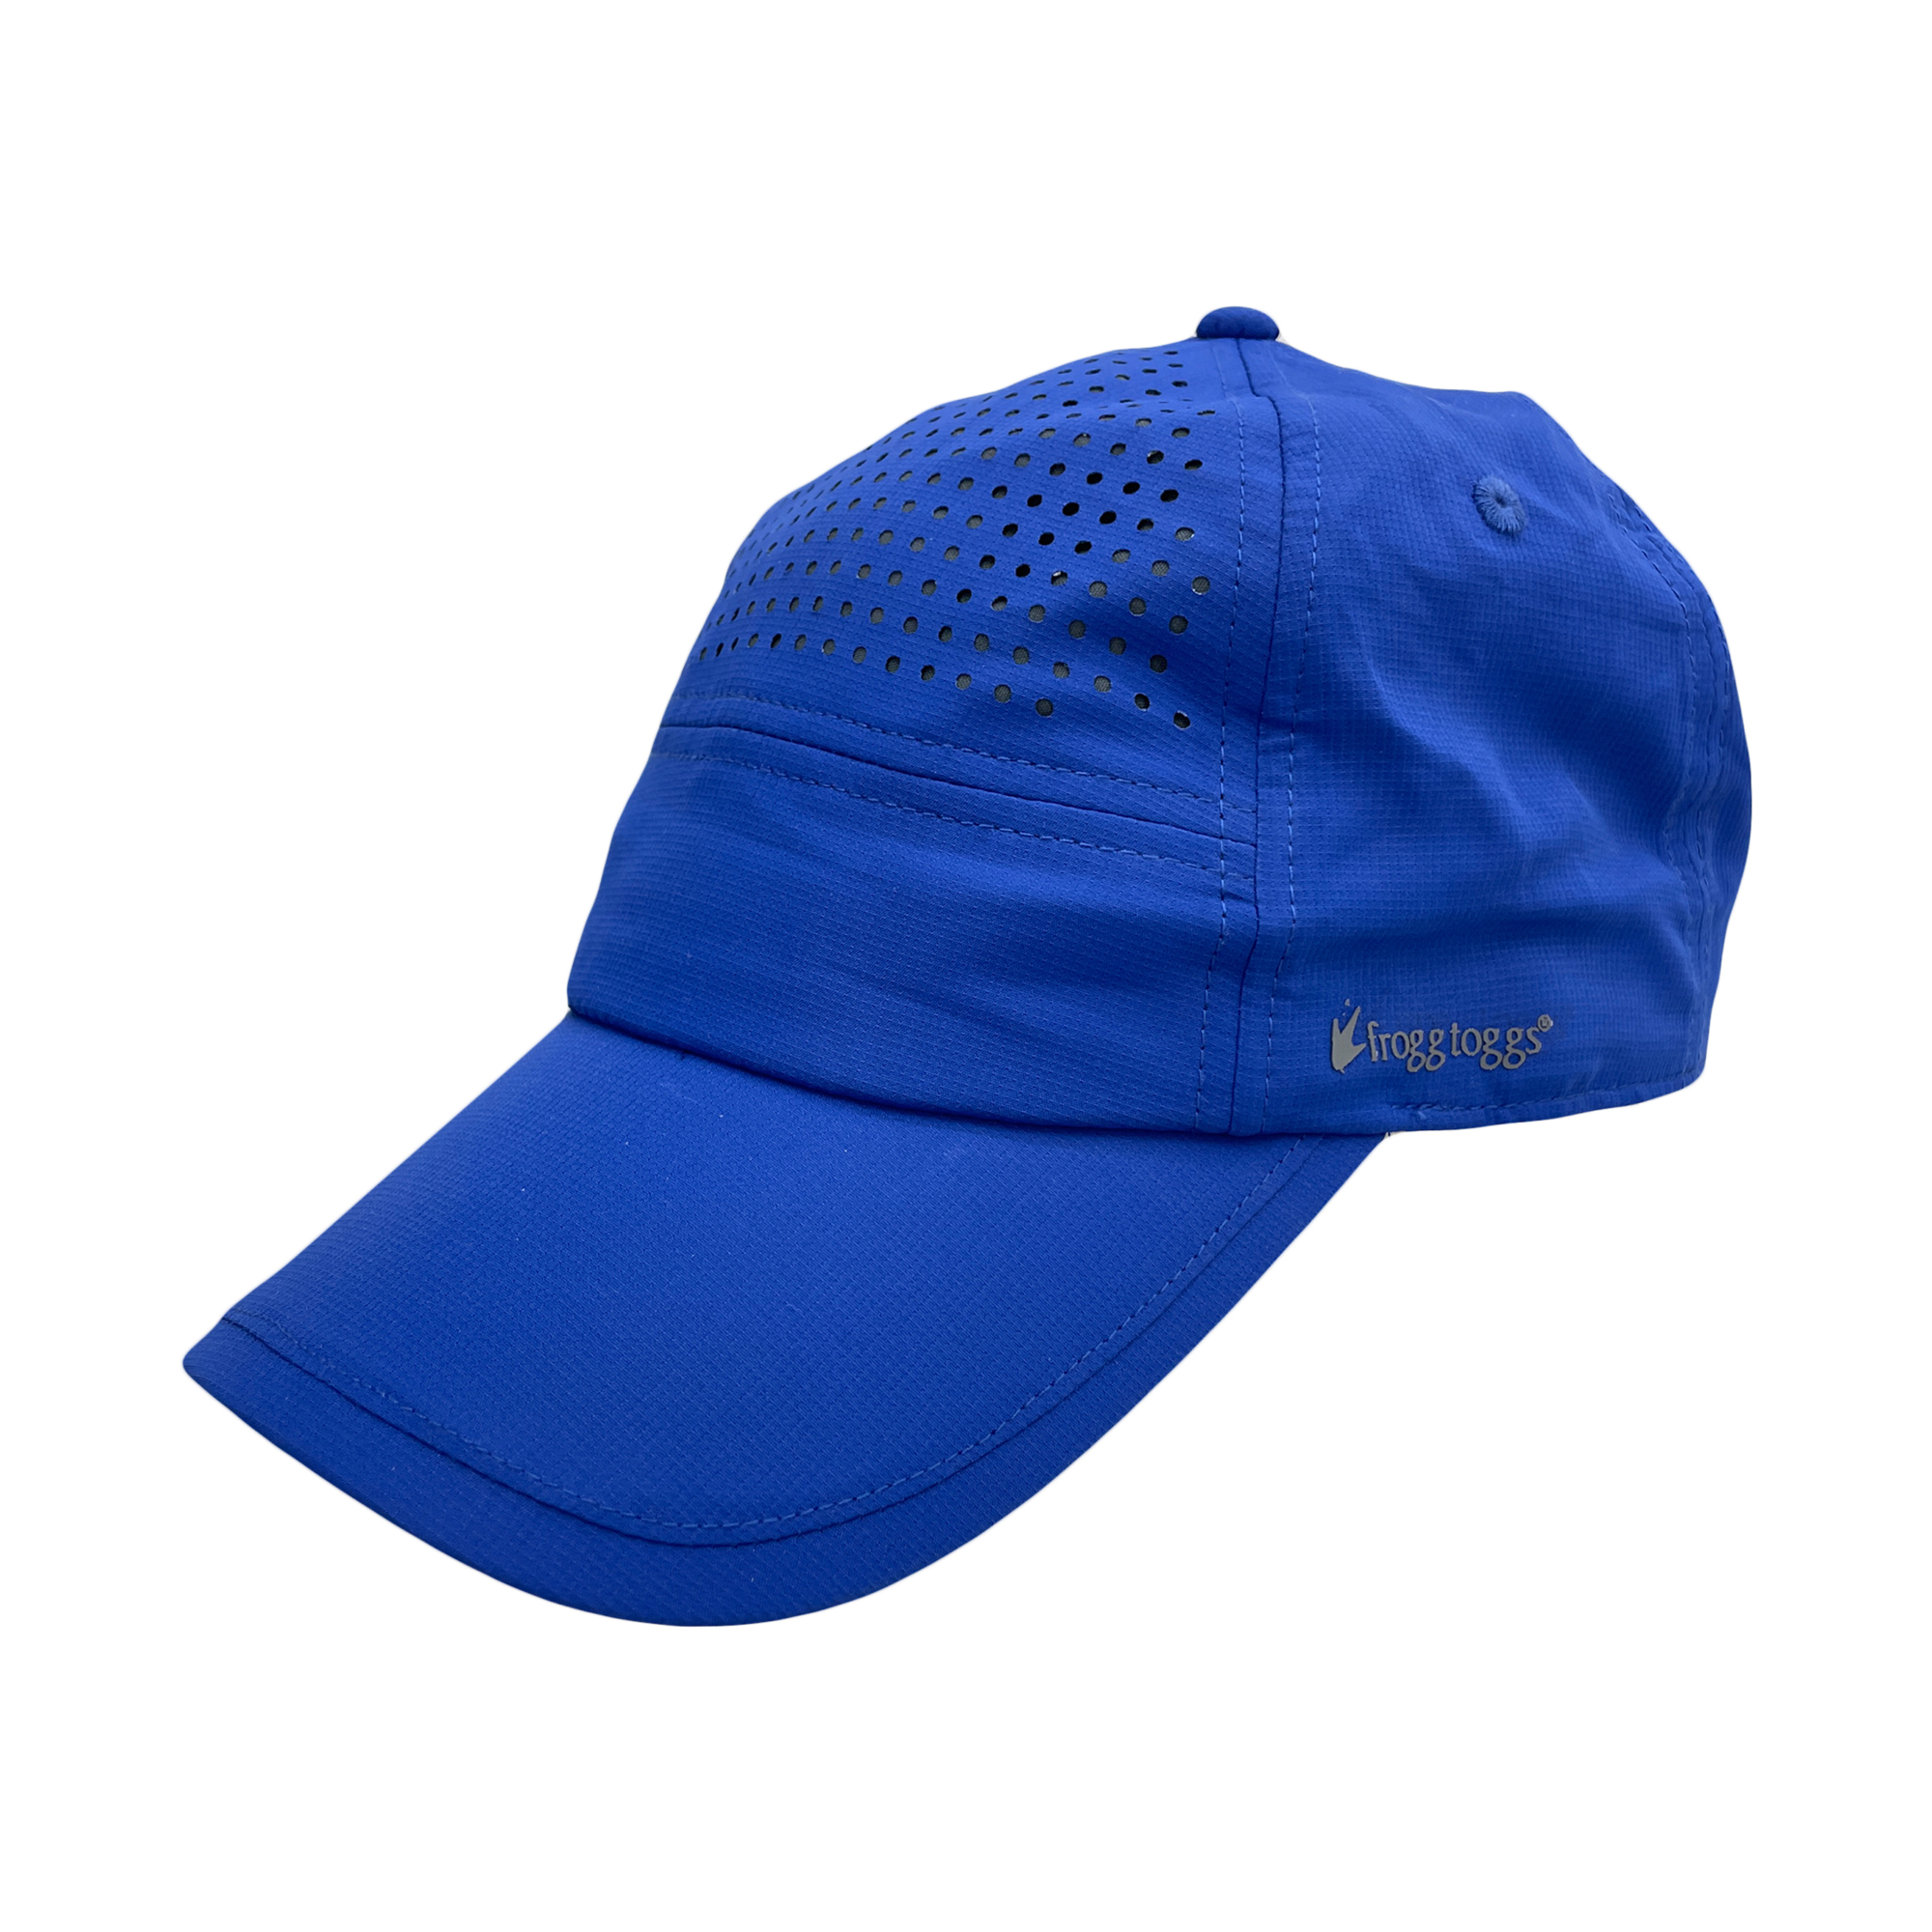 frogg toggs, Chilly Pro Performance Cooling Cap, Size One Size, Color Athletic Blue, Hat Style Hat, Model 6CCP21-616